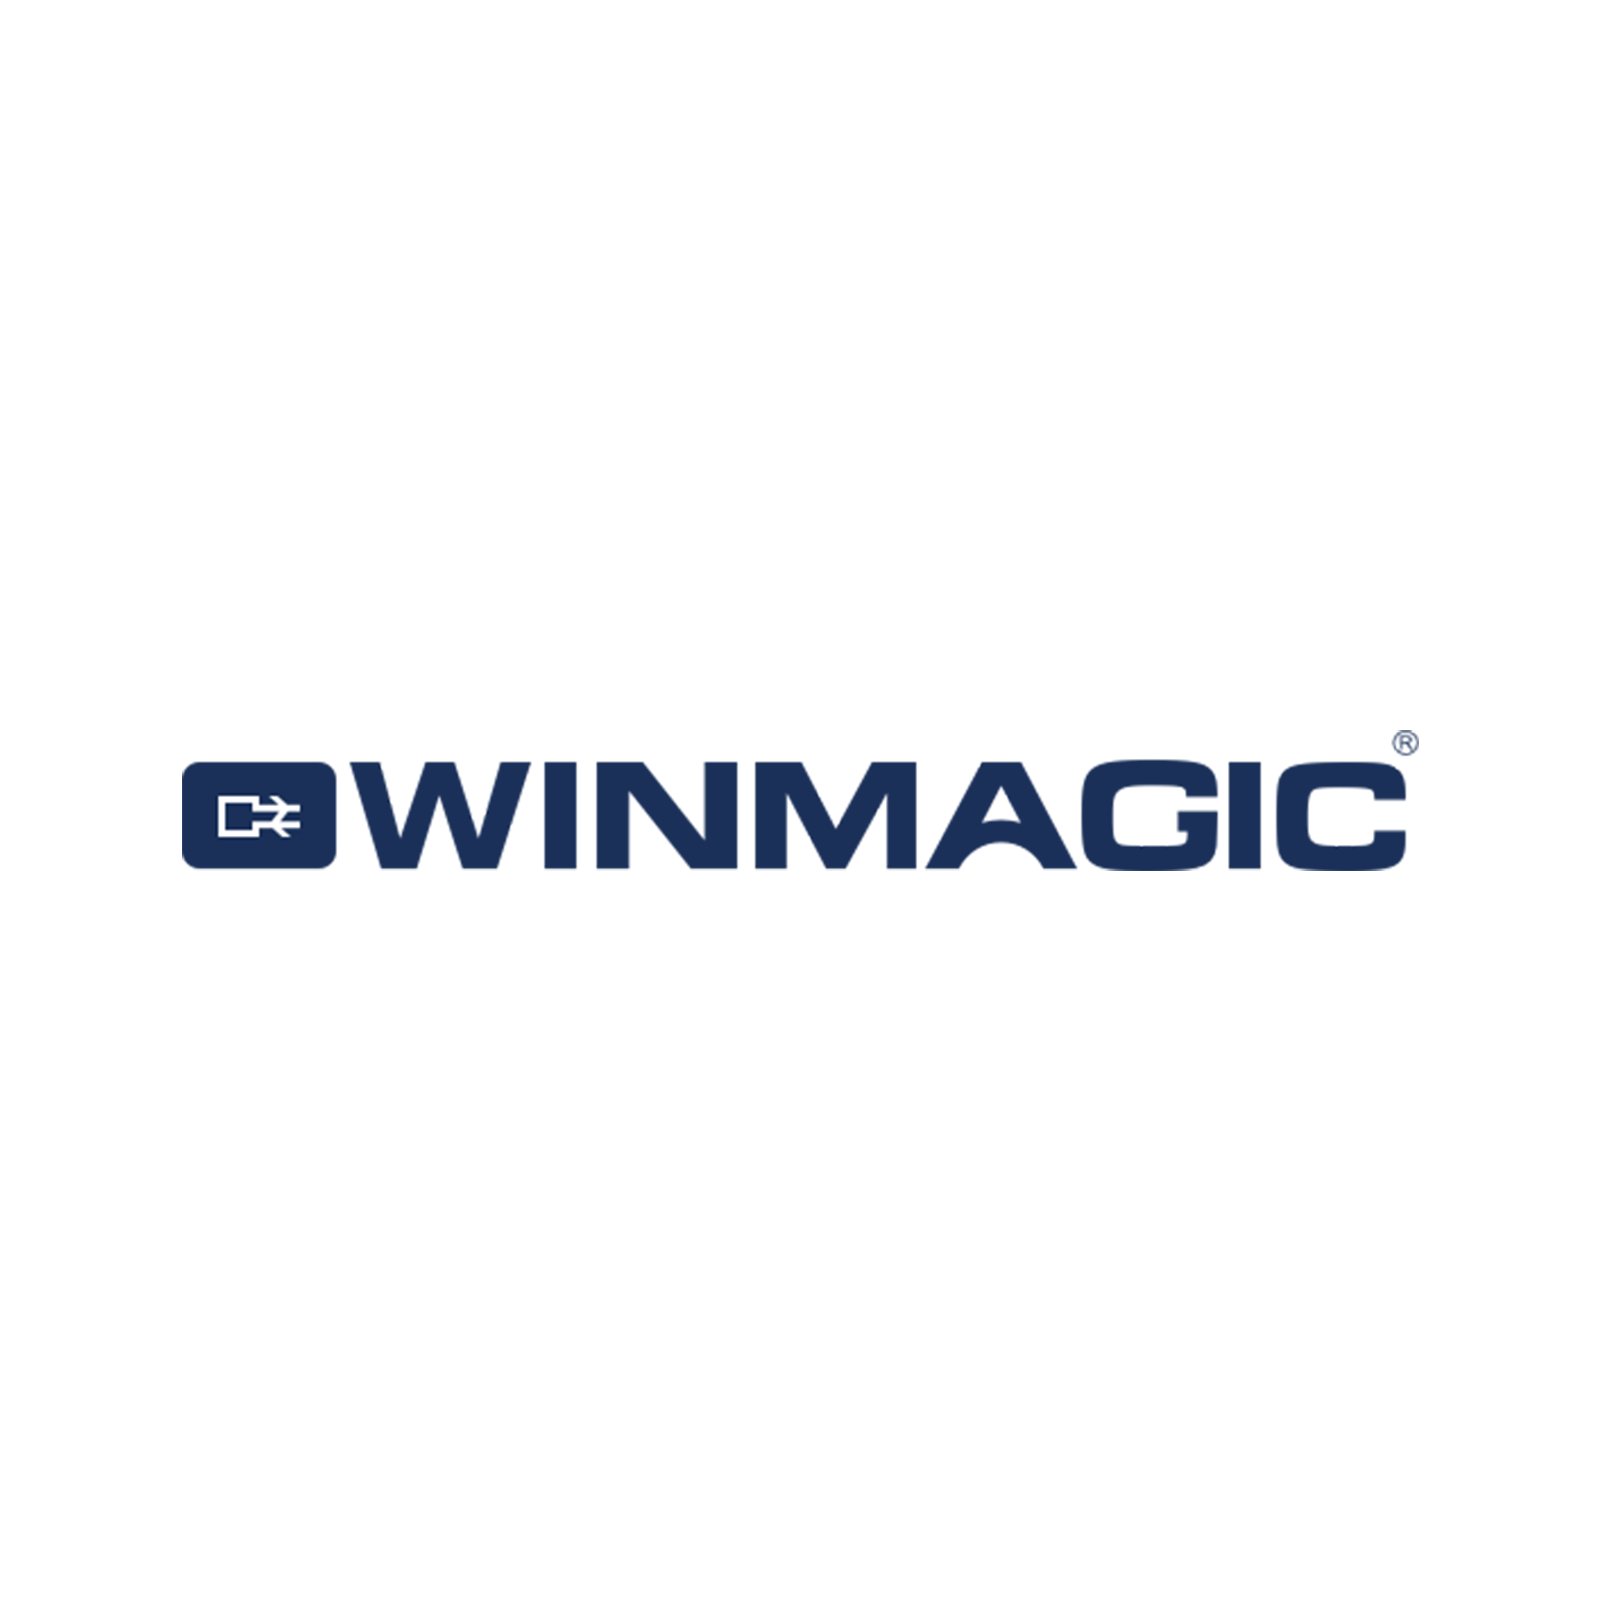 Middletown, Delaware, United States agency Tru Performance Inc helped WinMagic grow their business with SEO and digital marketing